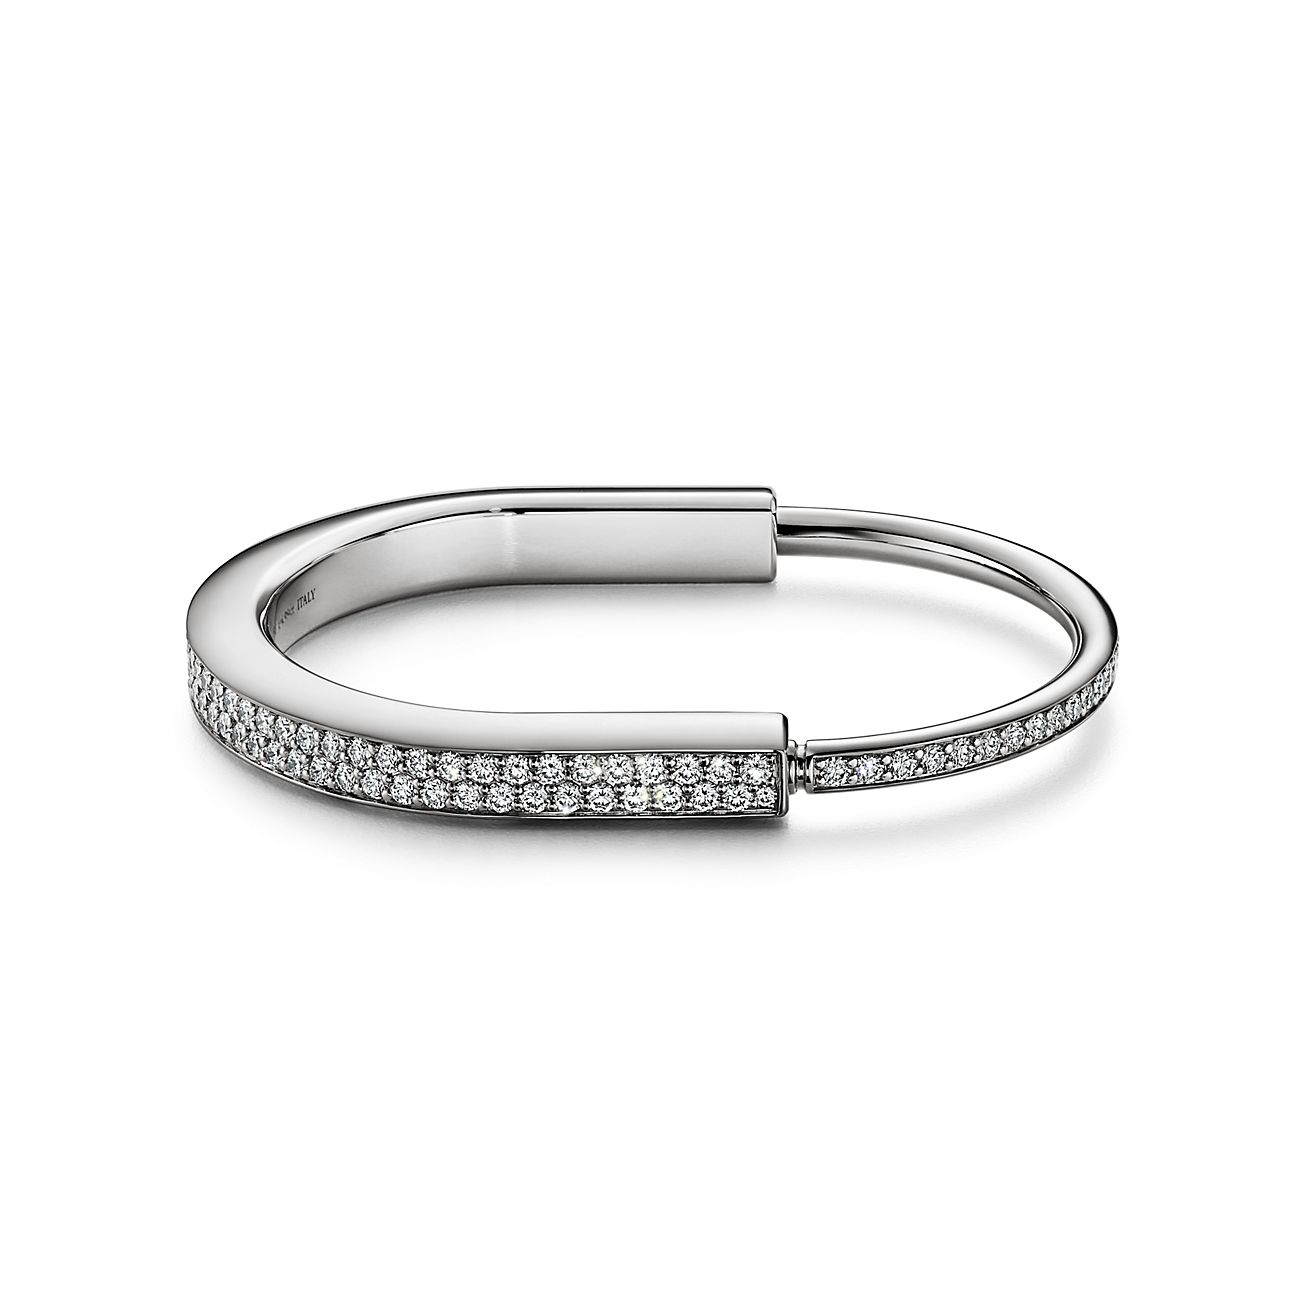 Tiffany's 'Lock' Bangle May Be Its Answer to Cartier's 'Love' Bracelet